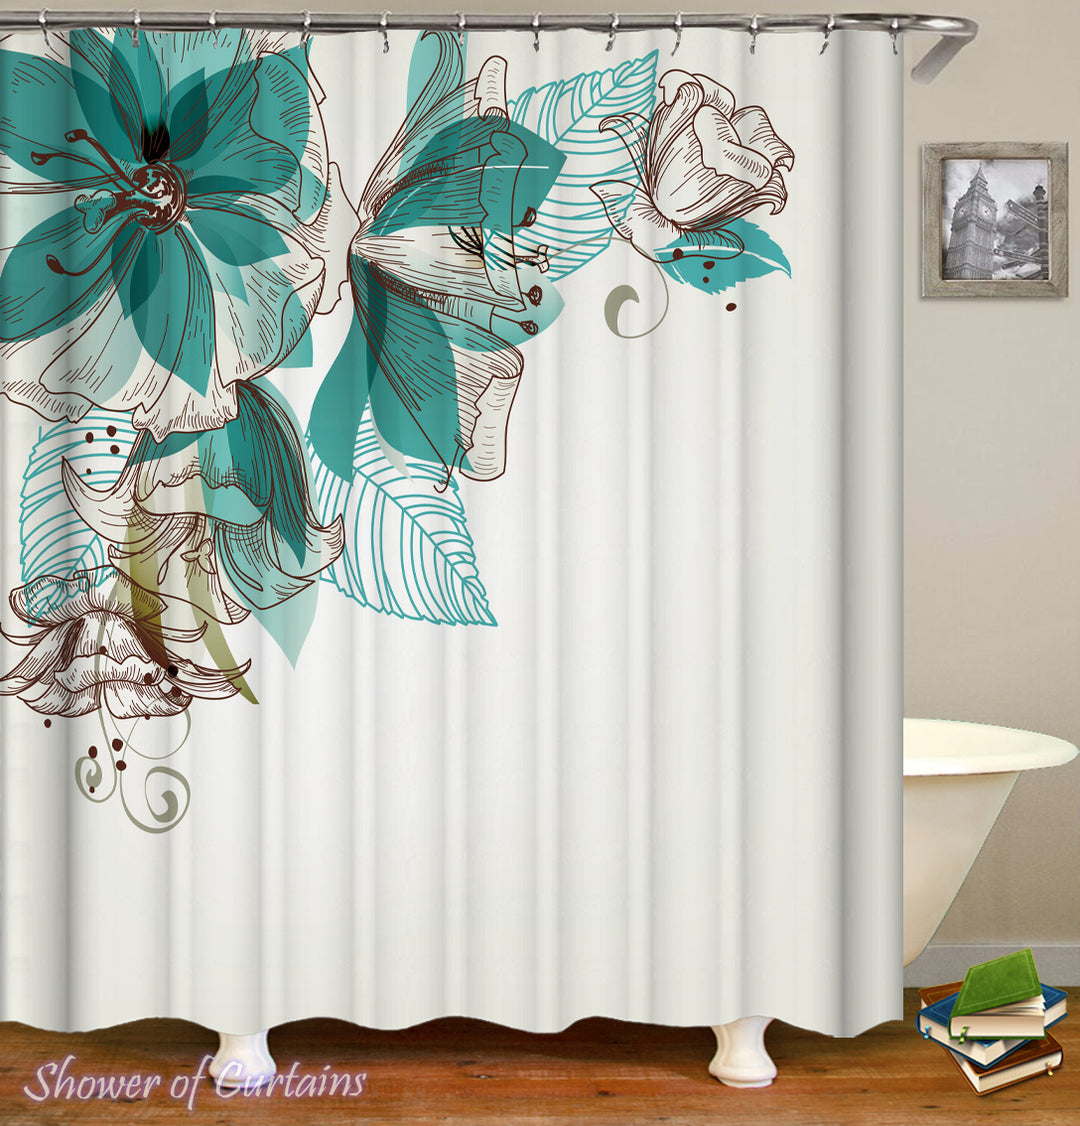 Shower curtain of Turquoise Flowers 